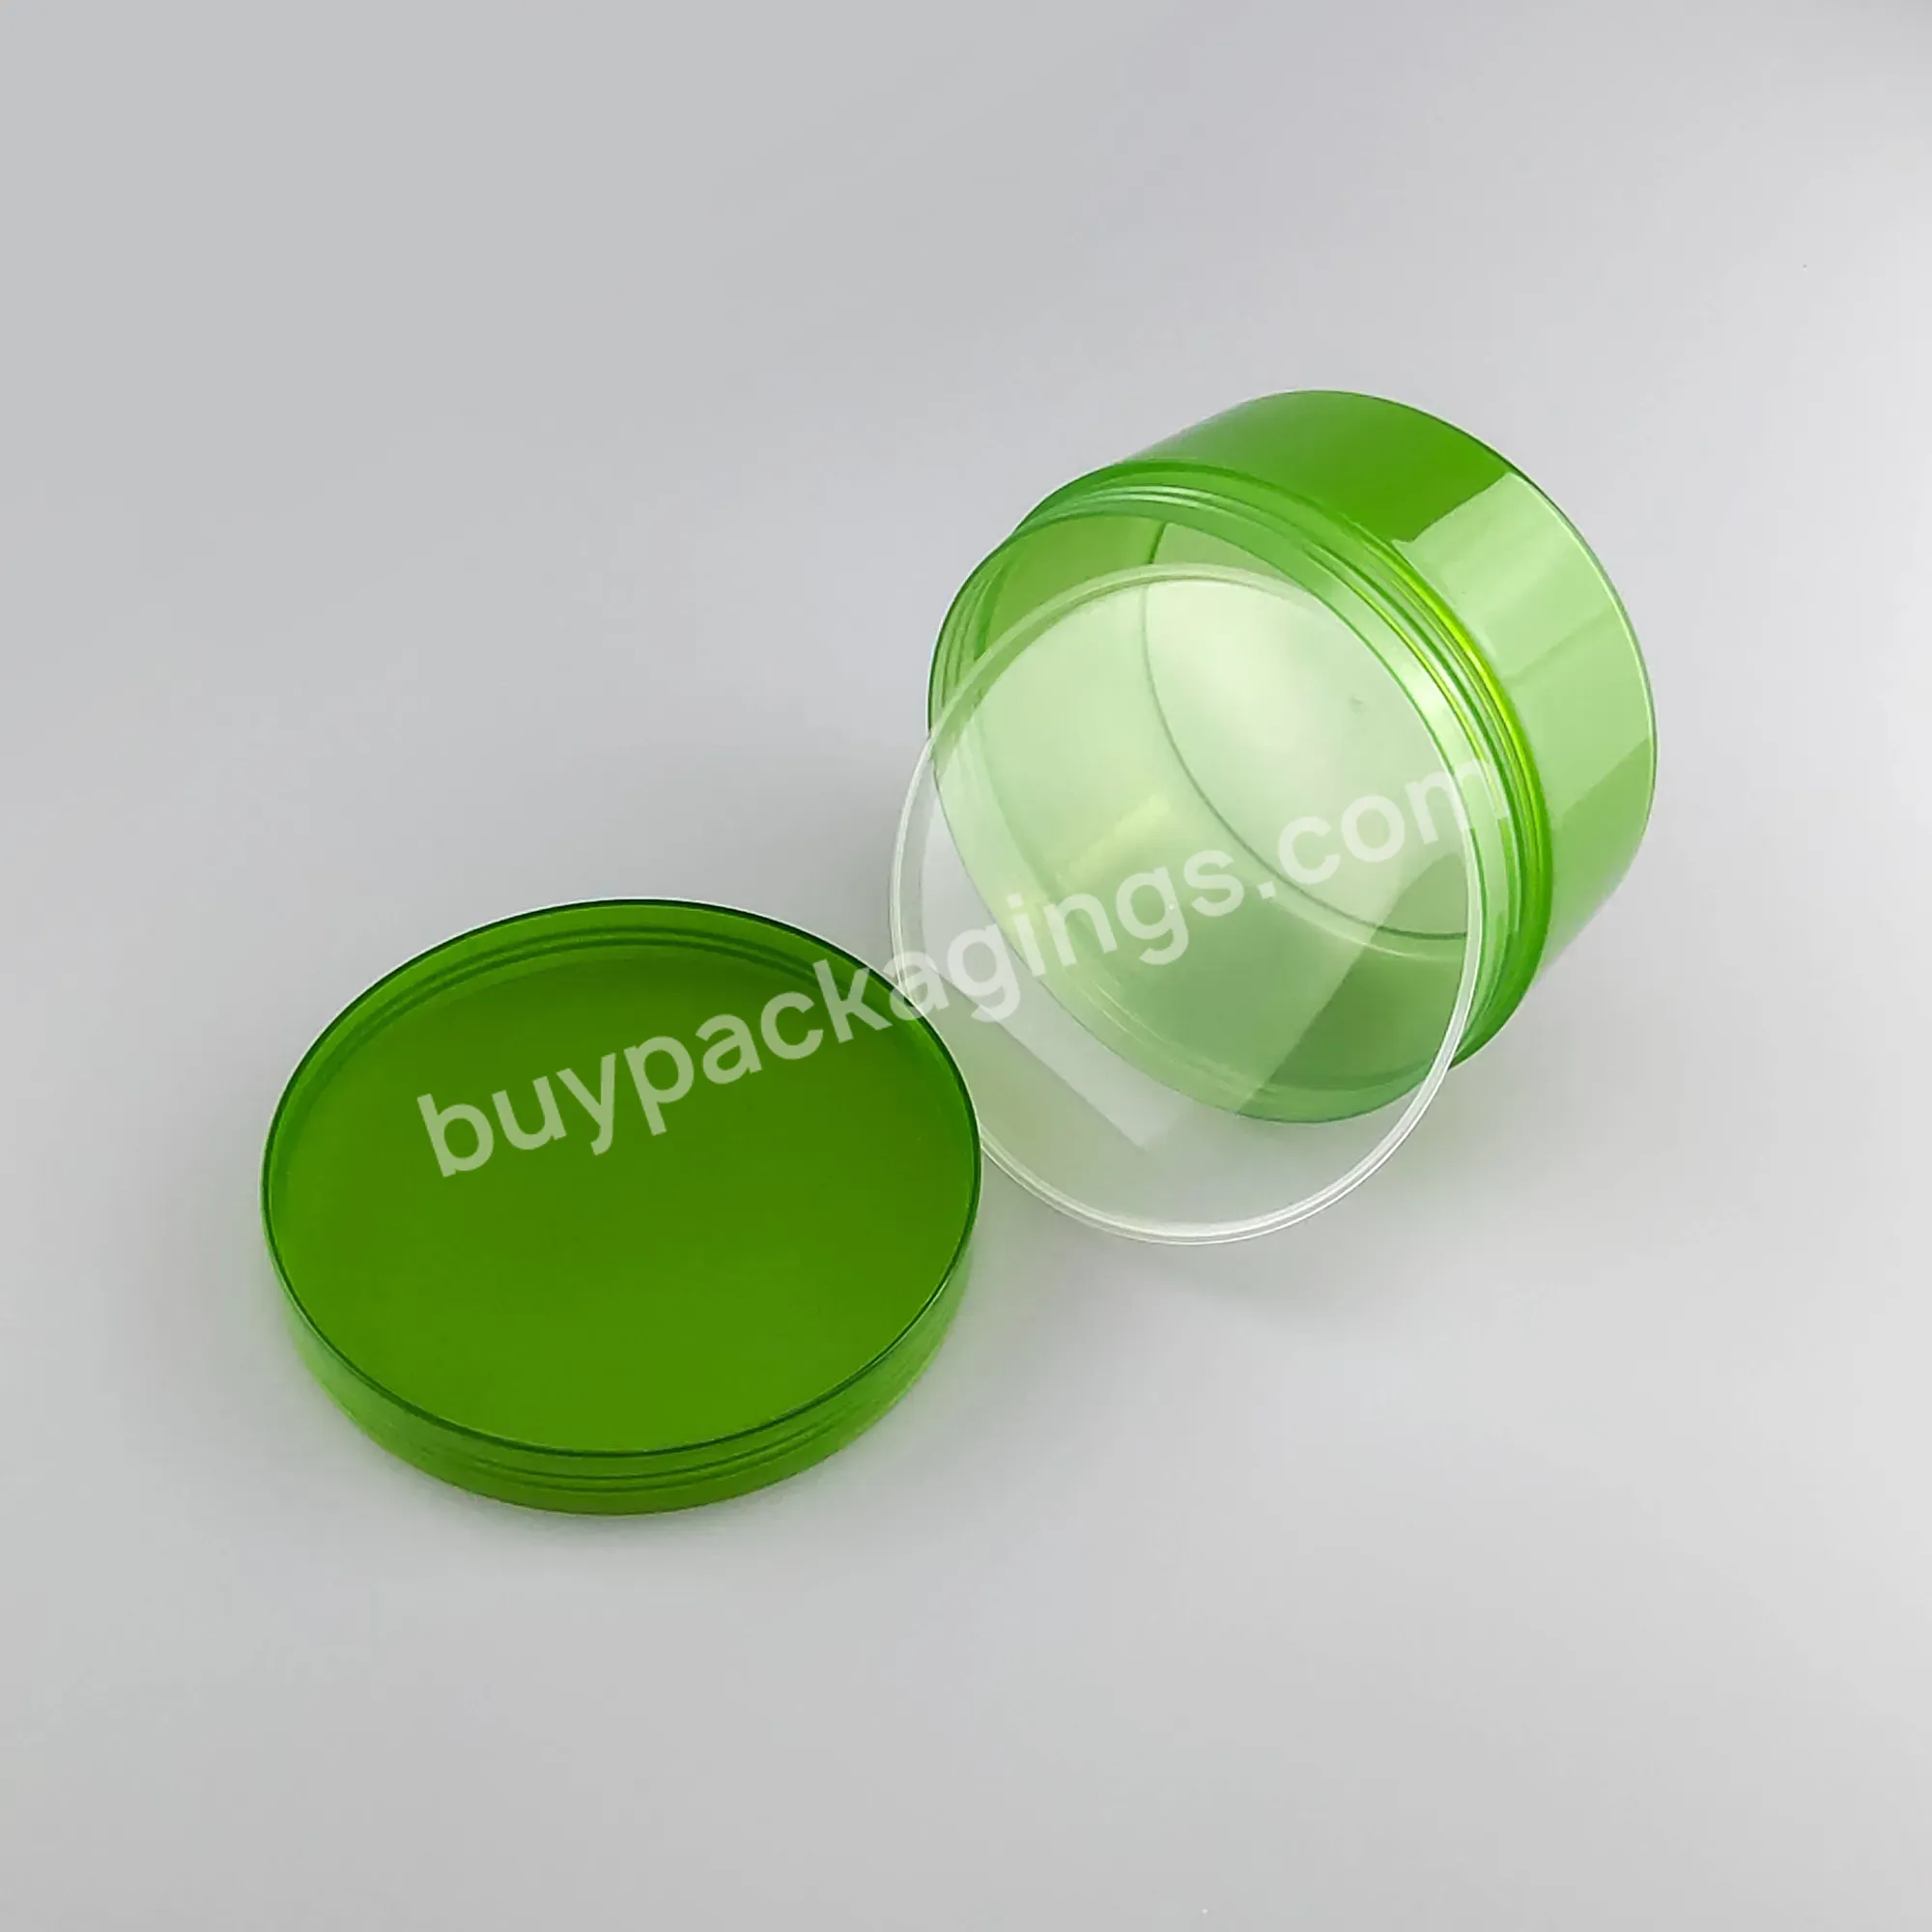 On Sales - Pp Plastic Cream Jar 300ml Green Empty Cosmetic Jar Body Scrub Container For Sale In Stock - Buy Cream Jar Factory Wholesale Popular High Selling Cheap Black Skin Care Cream Jar In Stock With Custom Logo,Cosmetic Jar Cosmetic Plastic Jar F